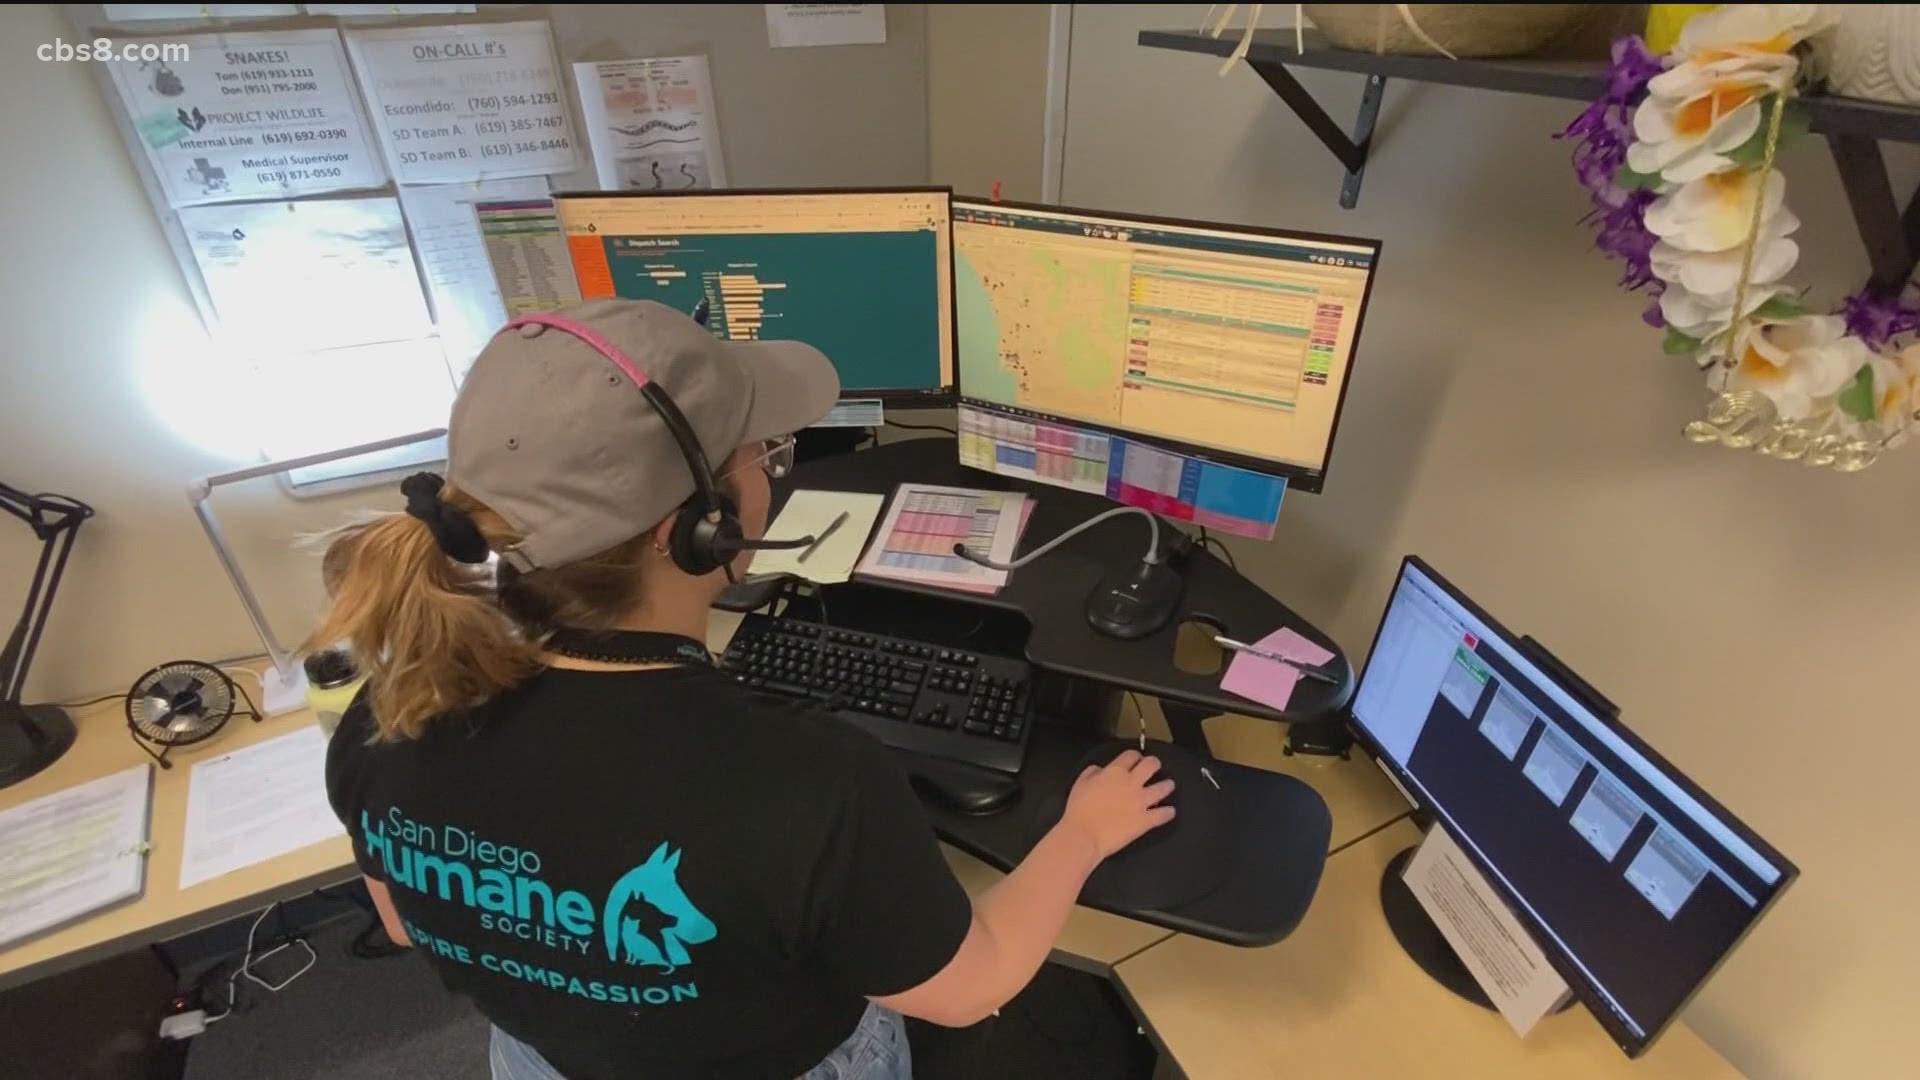 Starting Wednesday night, San Diego Humane Society dispatchers will answer your call after hours.